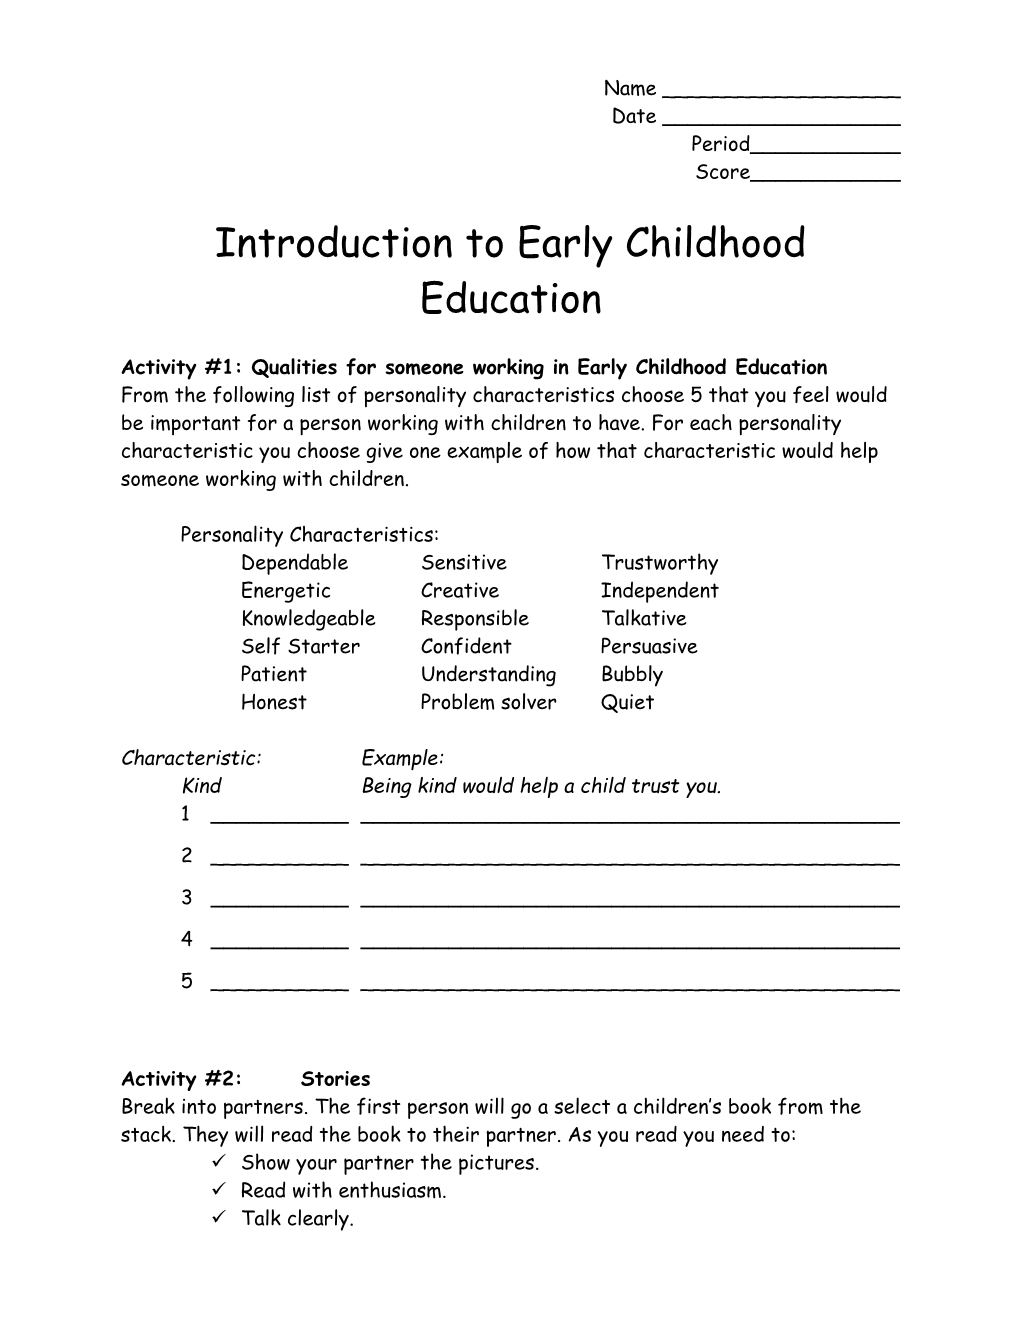 Activity #1: Qualities Forsomeone Working in Early Childhood Education